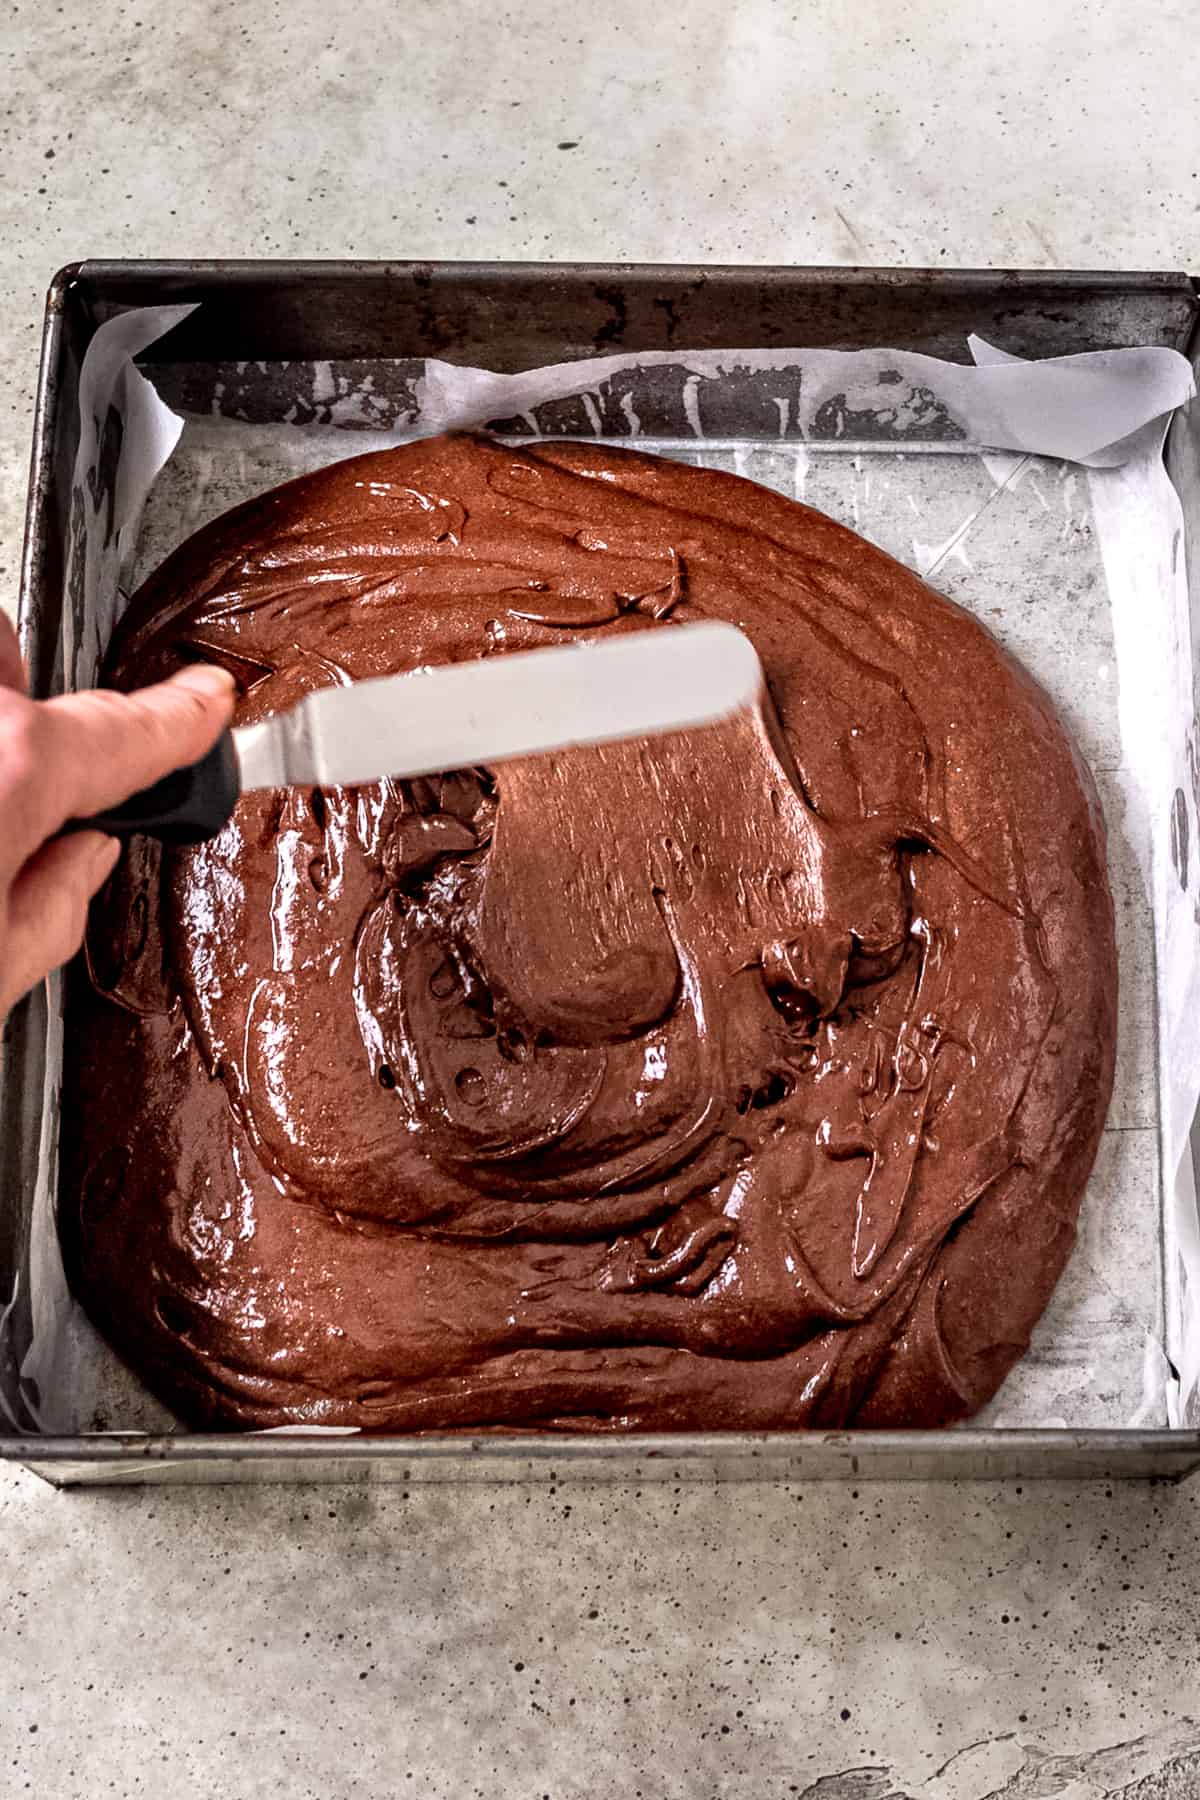 Spreading brownie batter into the lined baking tray.